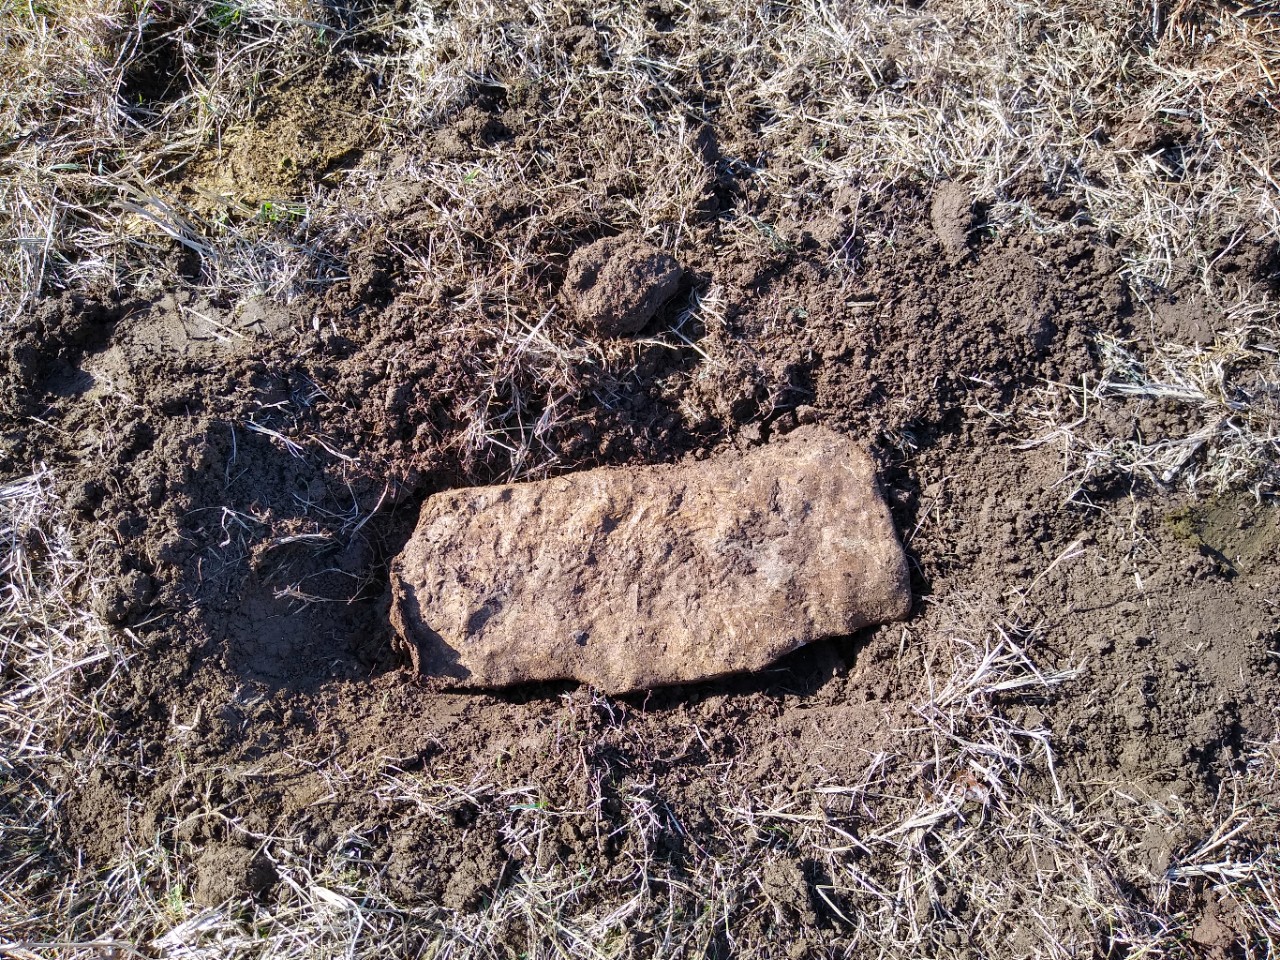 One of the shaped stone markers discovered